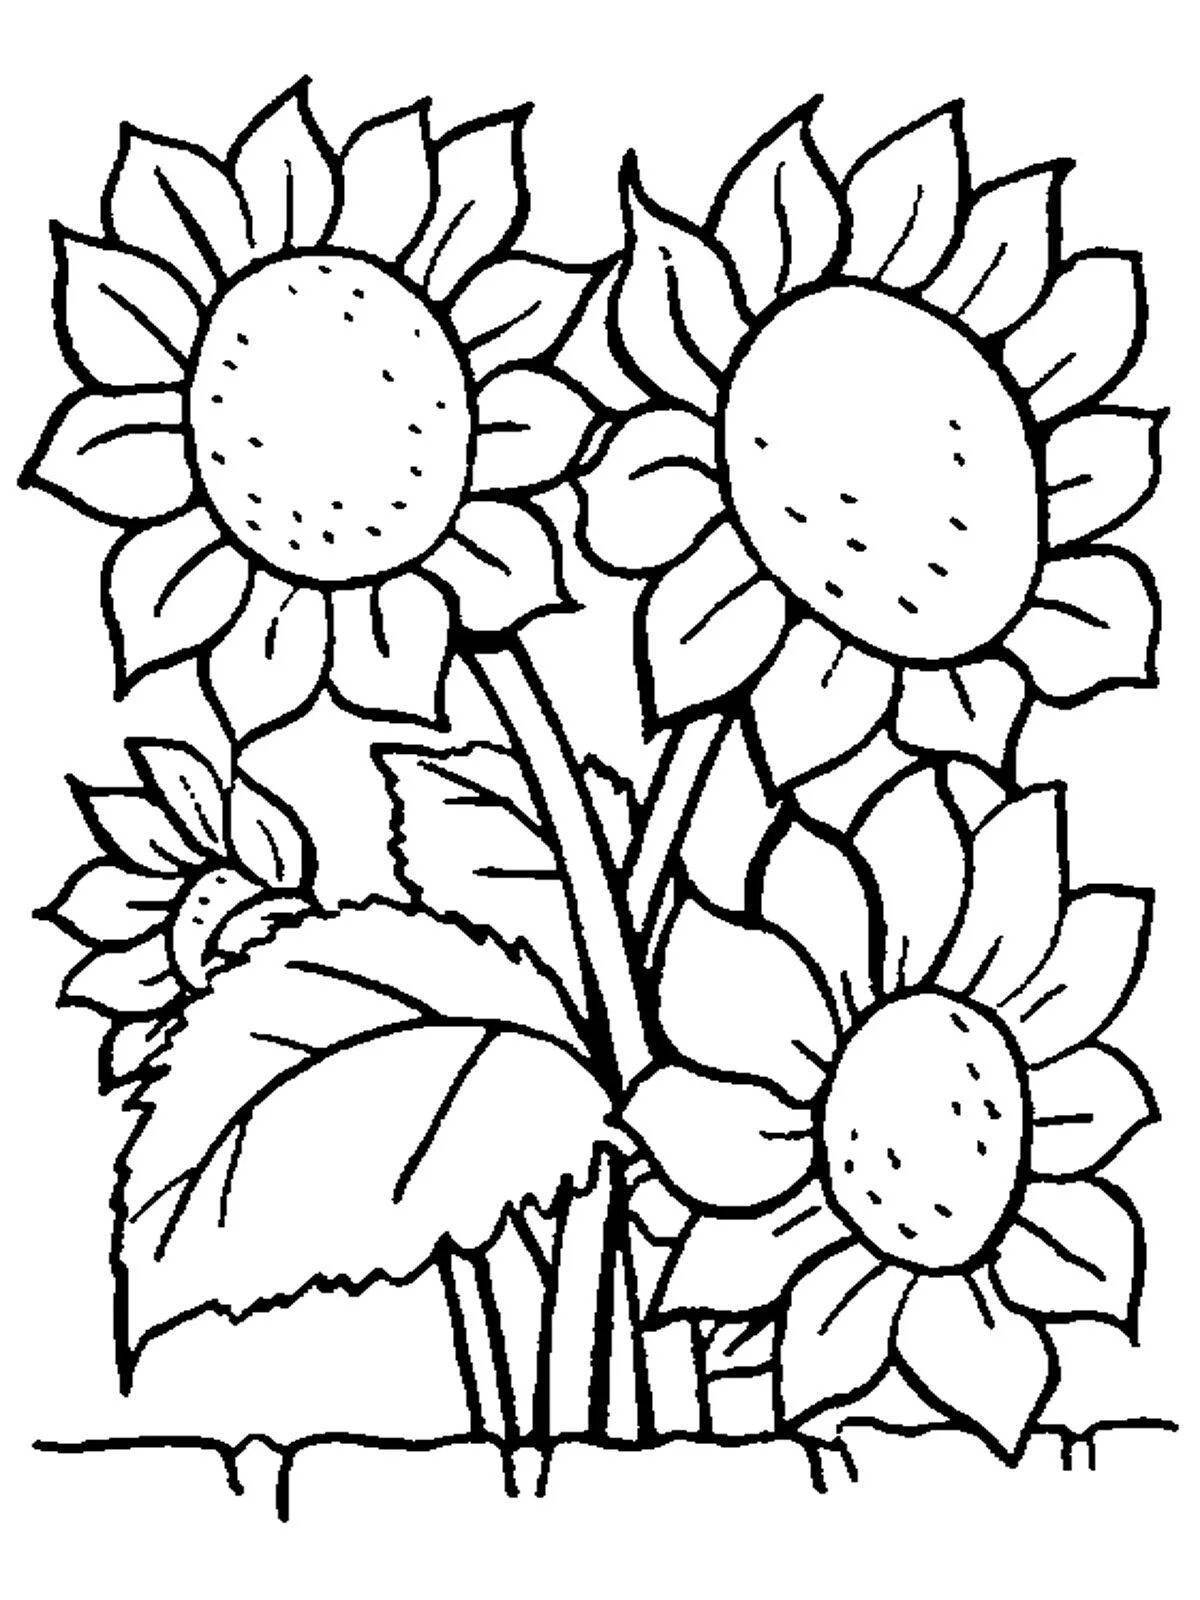 Amazing flower coloring book for kids 5-6 years old